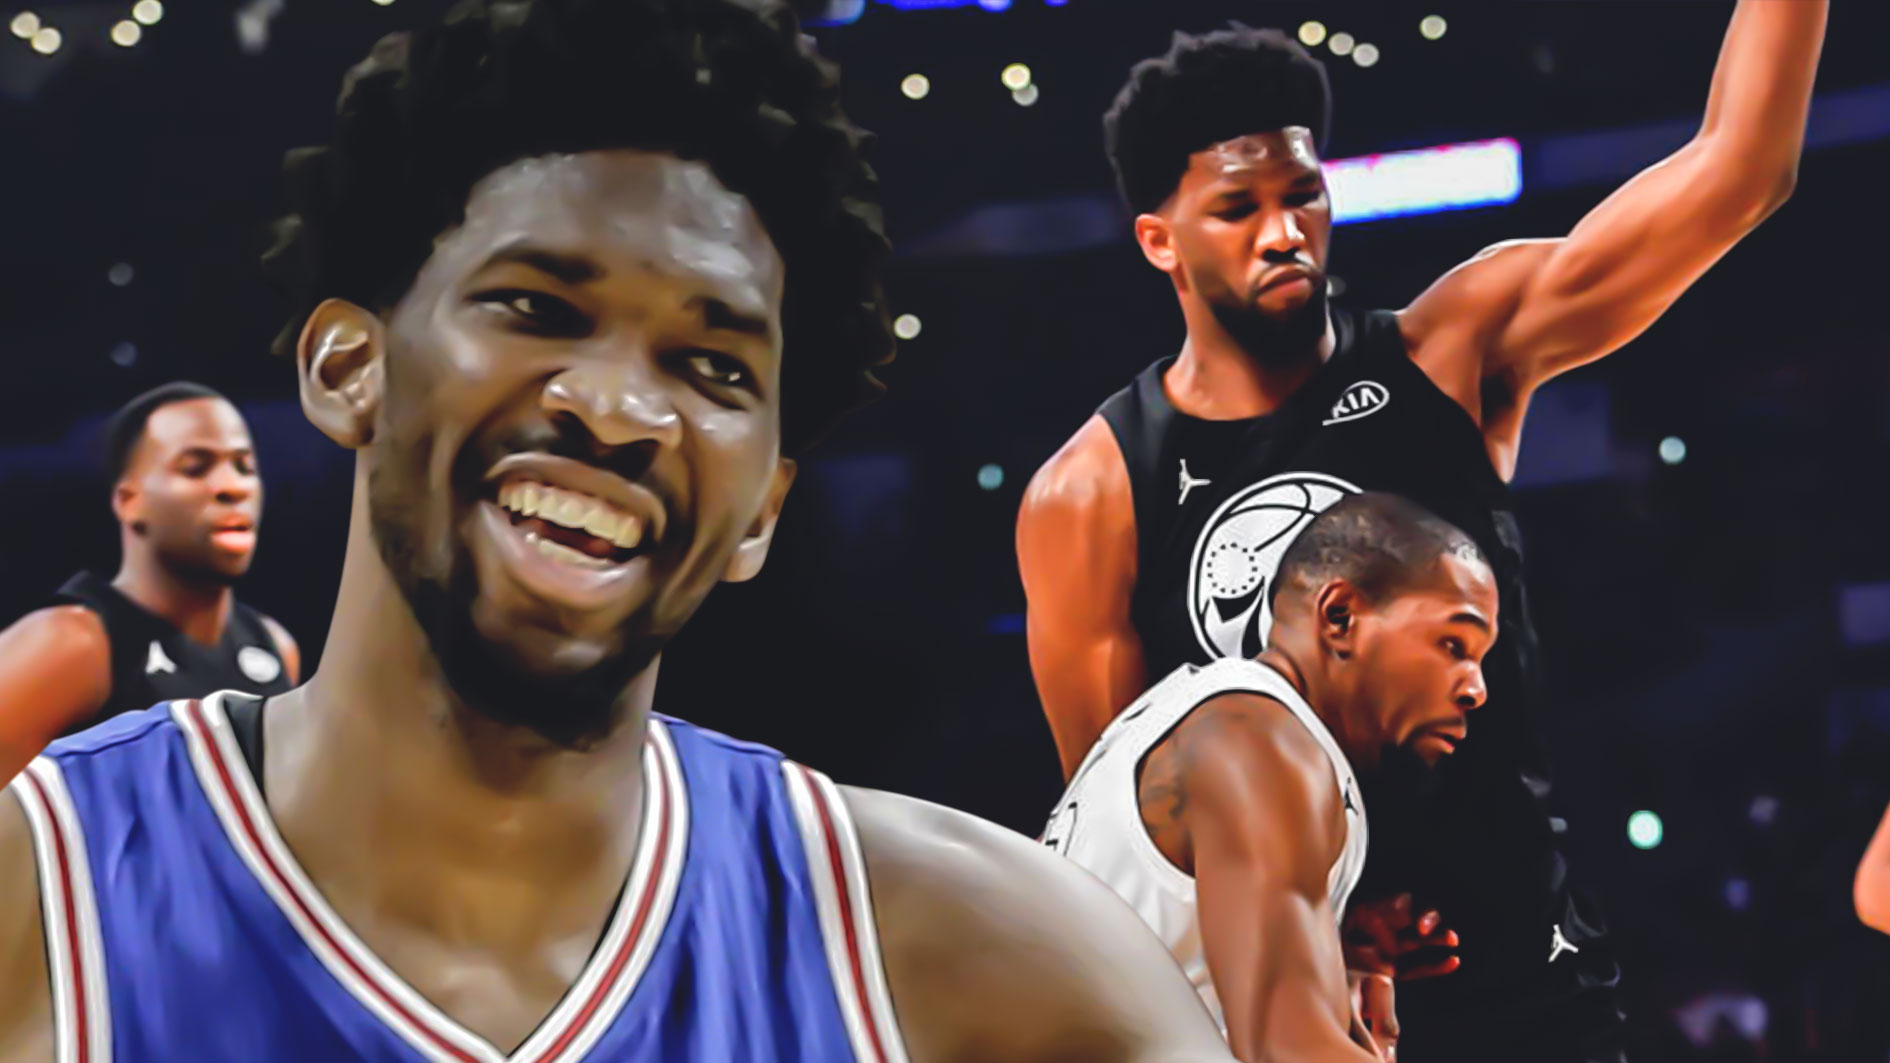 Joel-Embiid-thinks-All-Star-Game-proved-he-can-keep-up-with-the-best-players